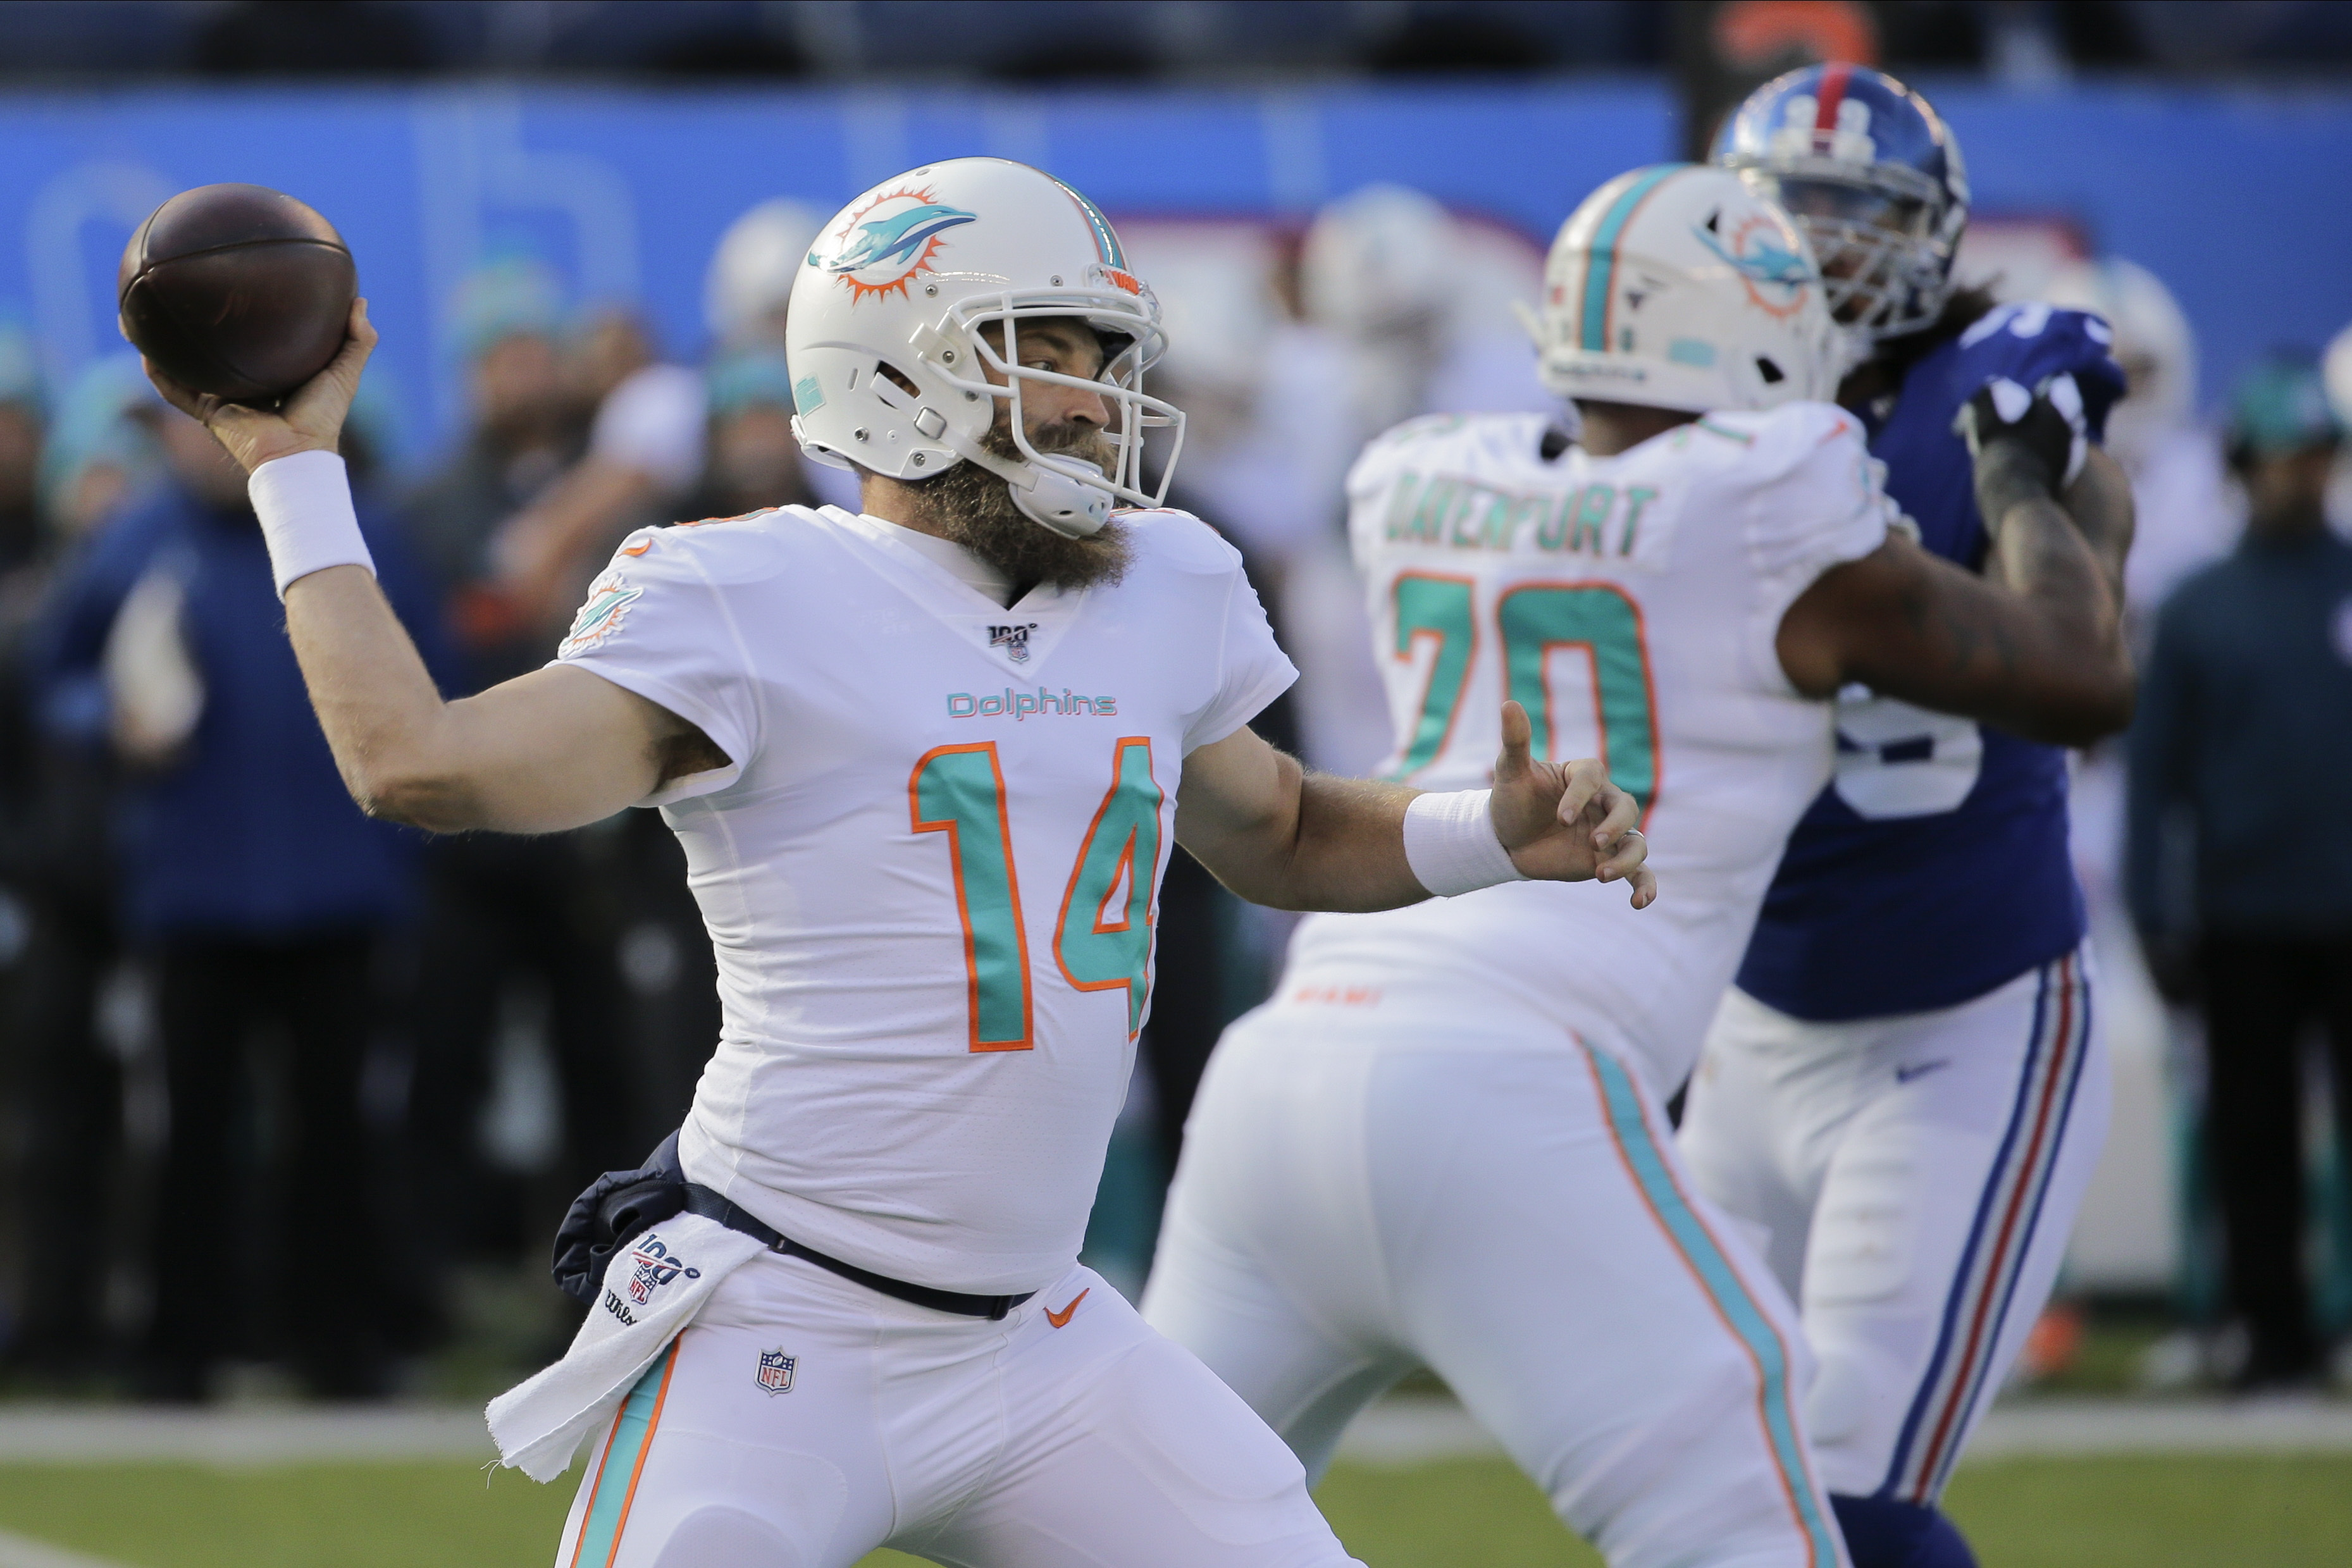 Dolphins will go for win that would ruin shot at No. 1 pick